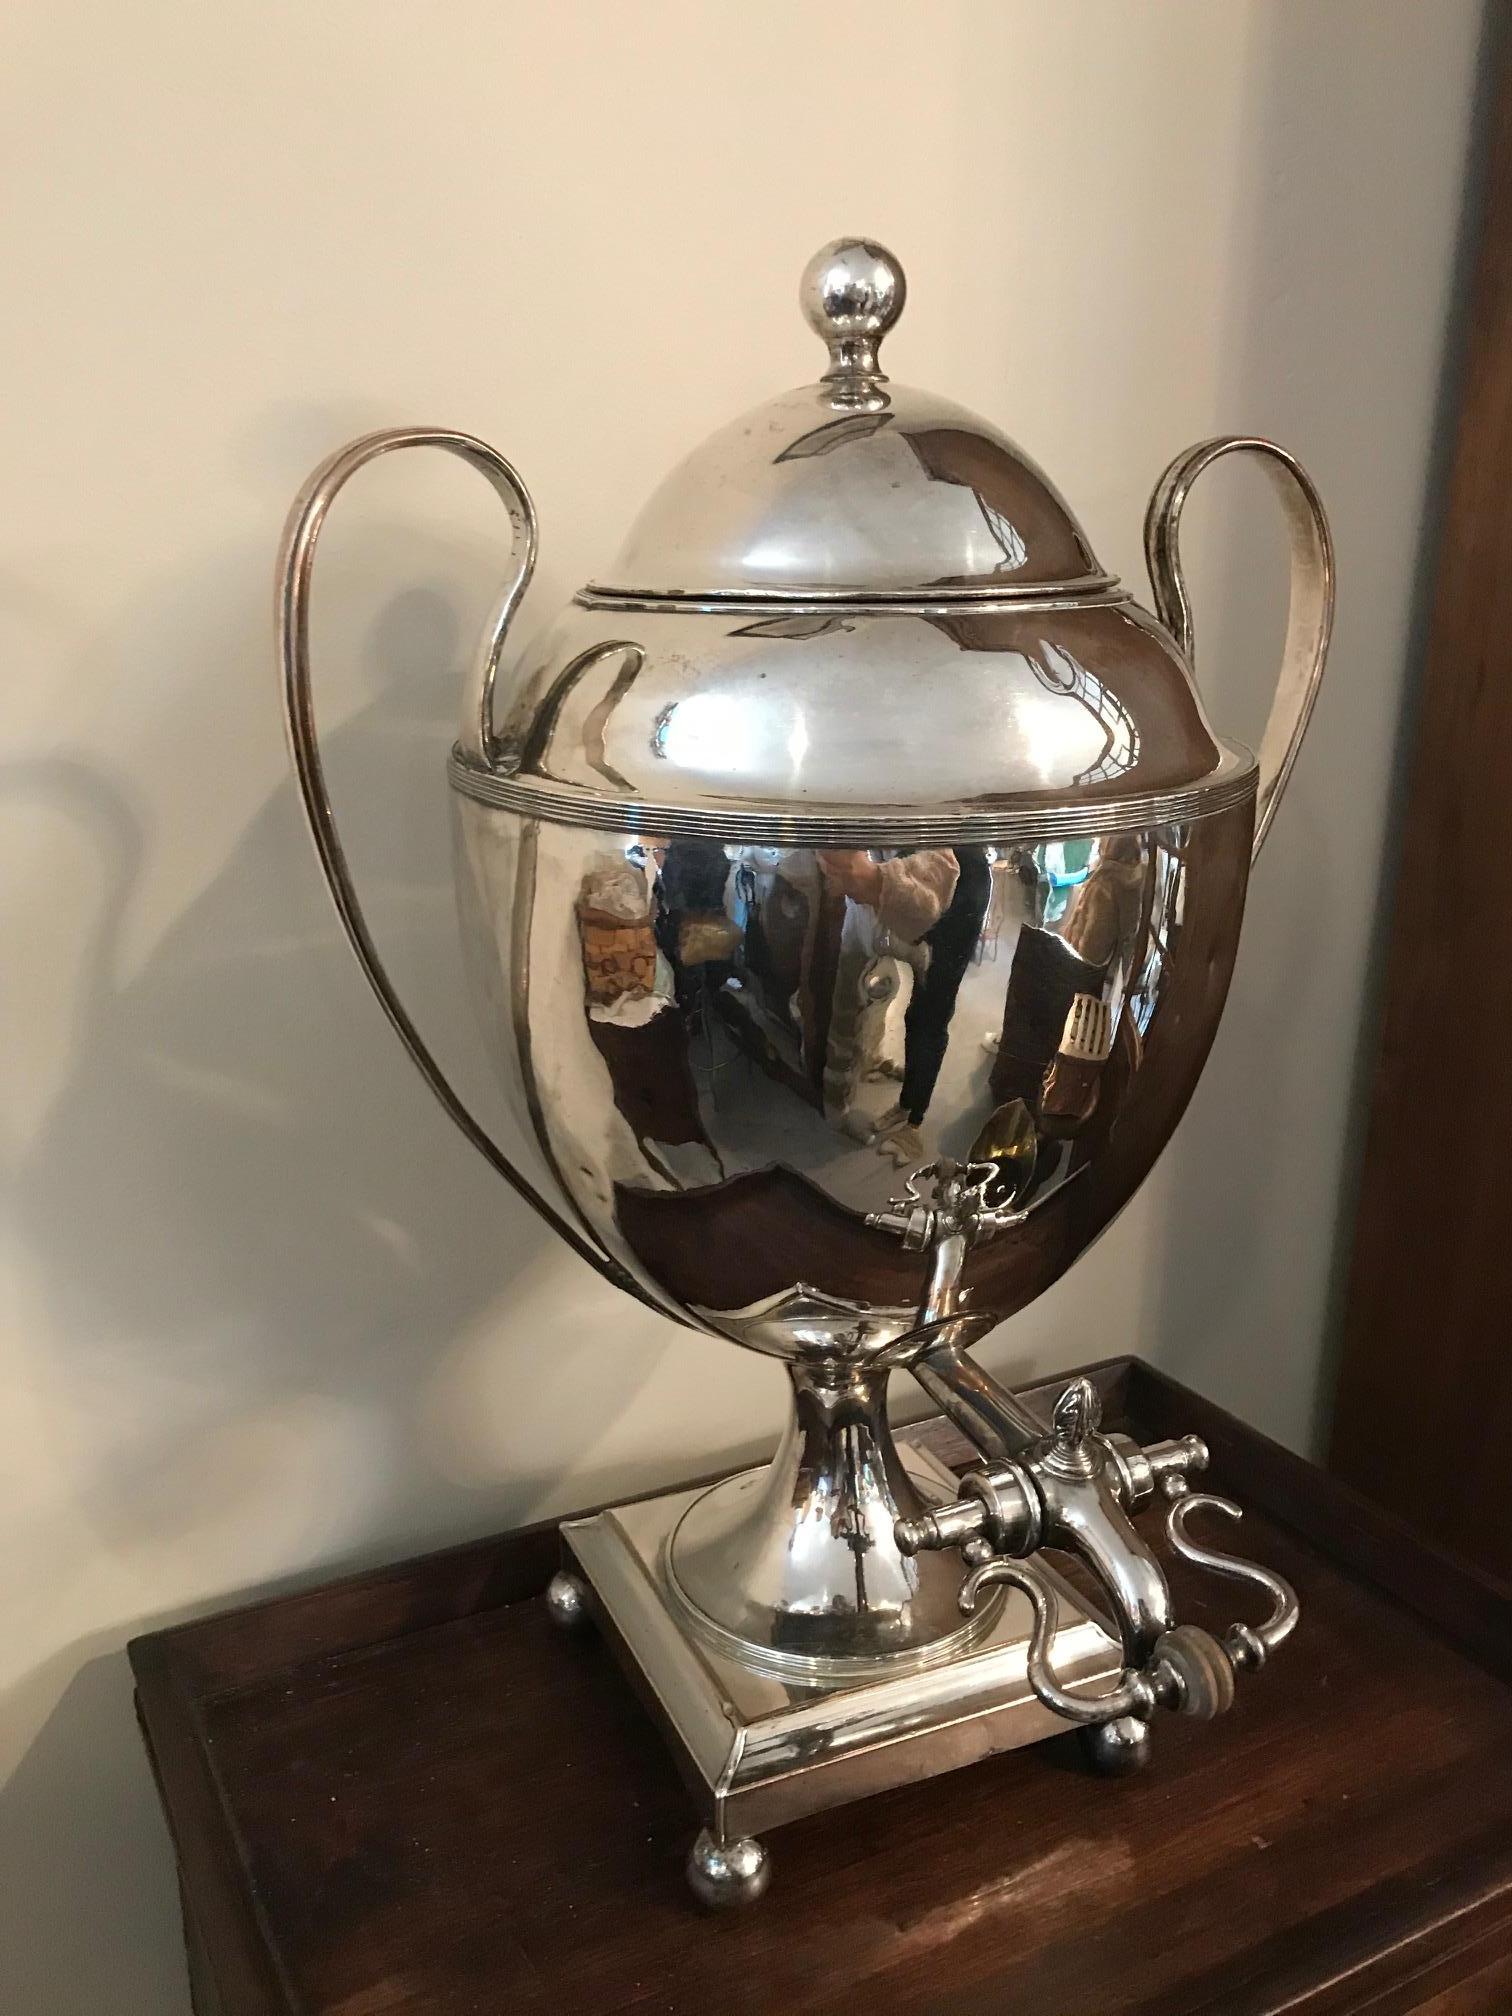 Very nice 20th century Russian silver plated Samovar from the 1900s.
Used to serve the tea or refreshing beverage.
A little bit battered and discolored.
Top removable.